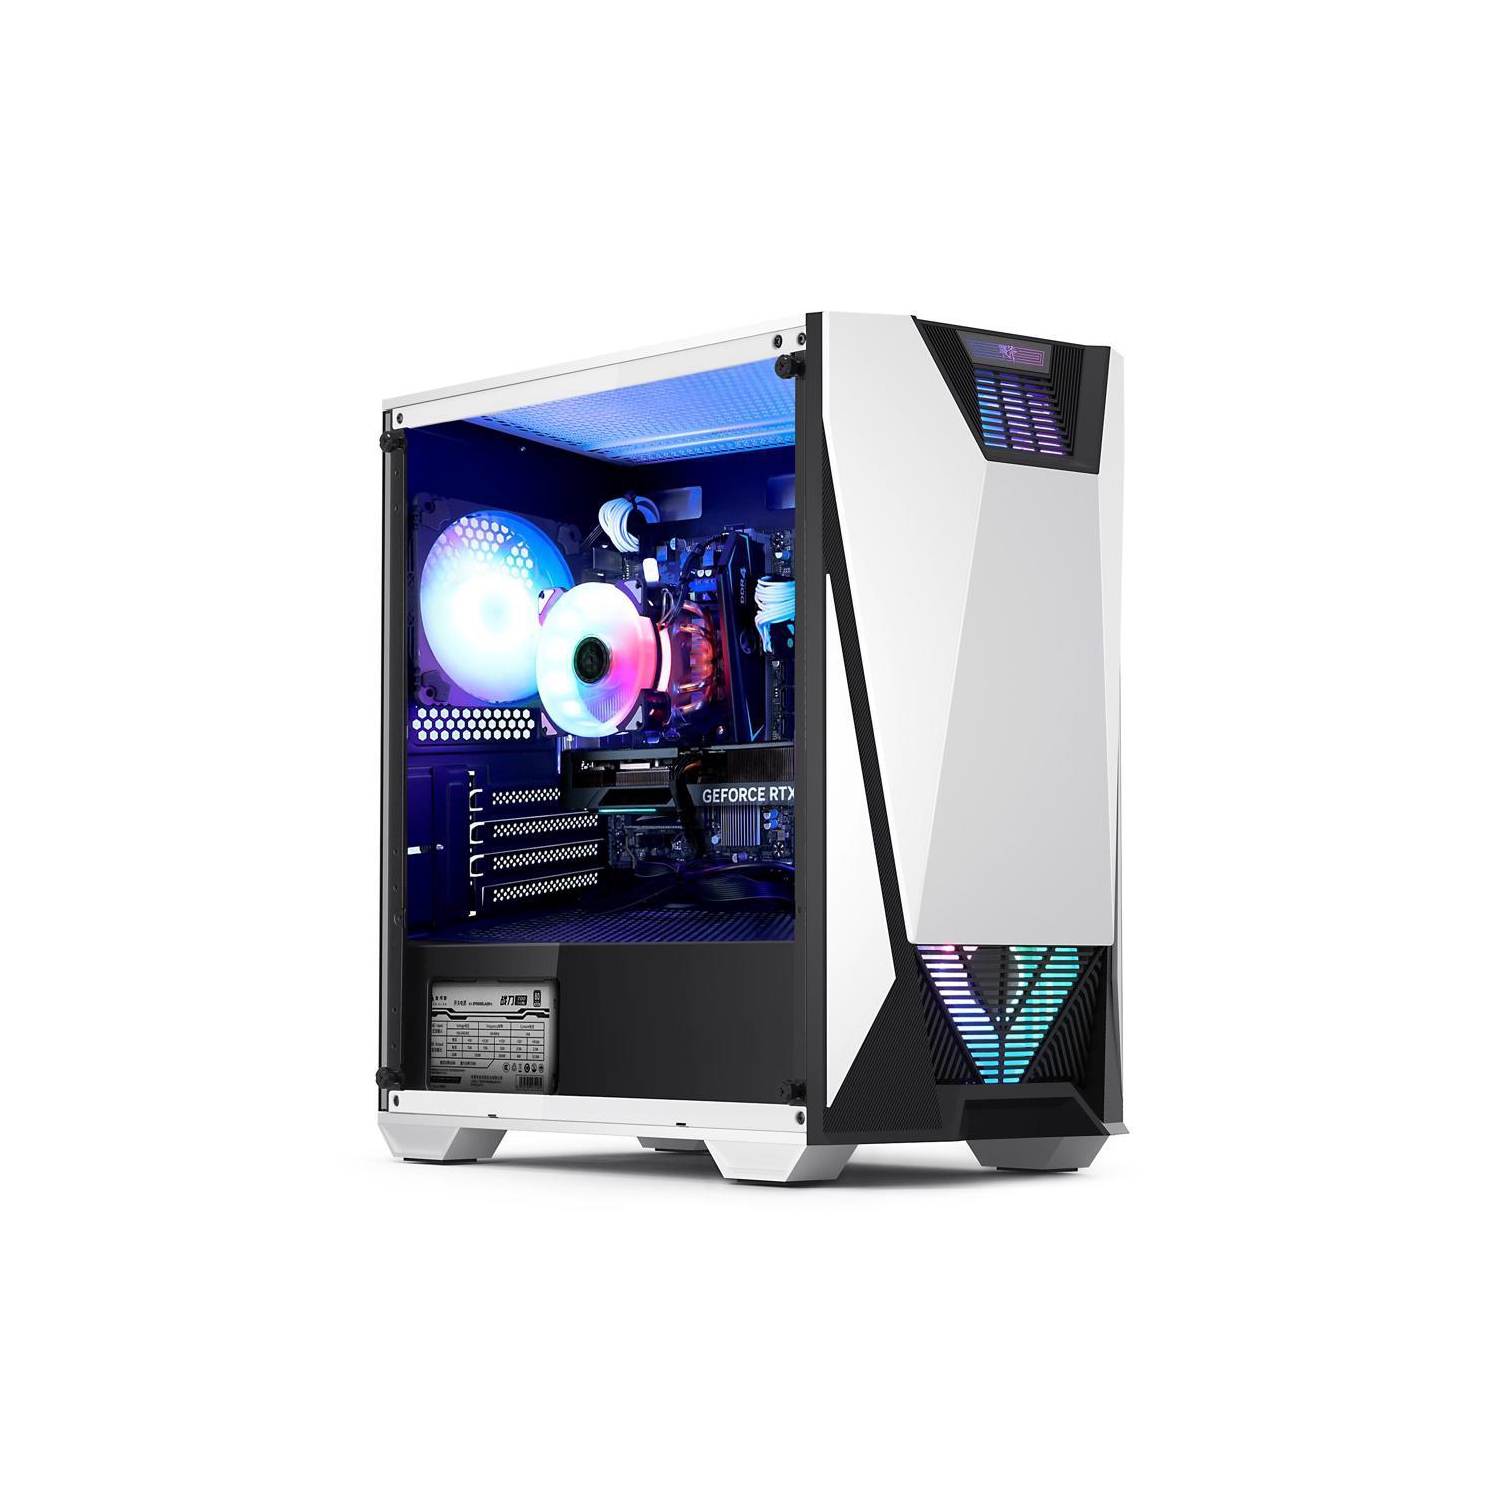 Hoengager Battleaxe Gaming - Intel Core i5-12600K 10-Core 3.7GHz-NVIDIA GeForce RTX 3060 Ti- 16GB DDR4 3200MHz - 500GB M.2 NVMe SSD- WIFI -RGB Fans - Windows 11 Pro Computer